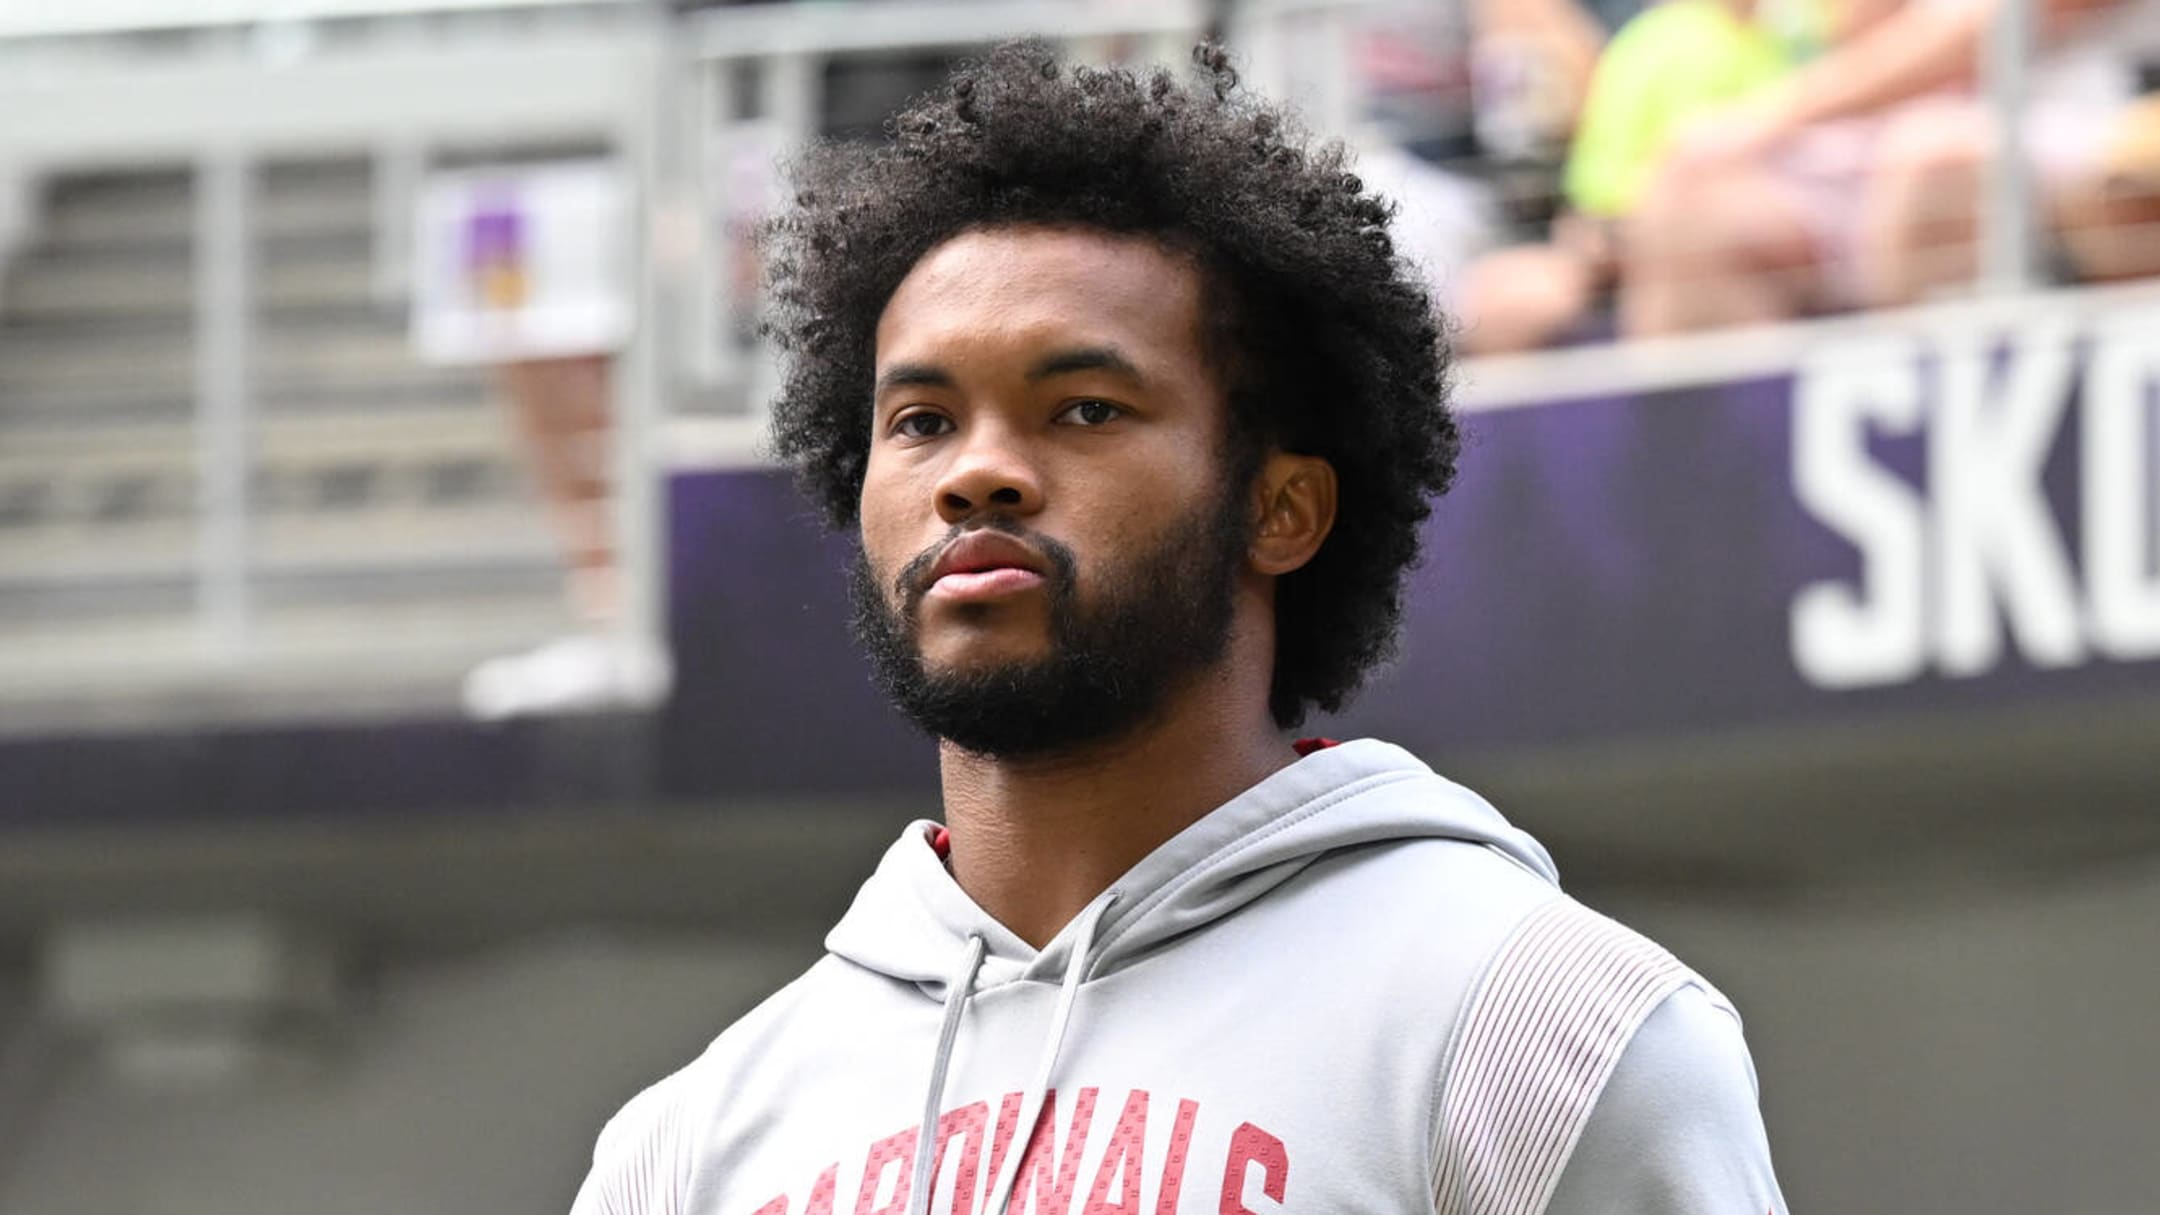 When can Cardinals fans expect to see Kyler Murray?